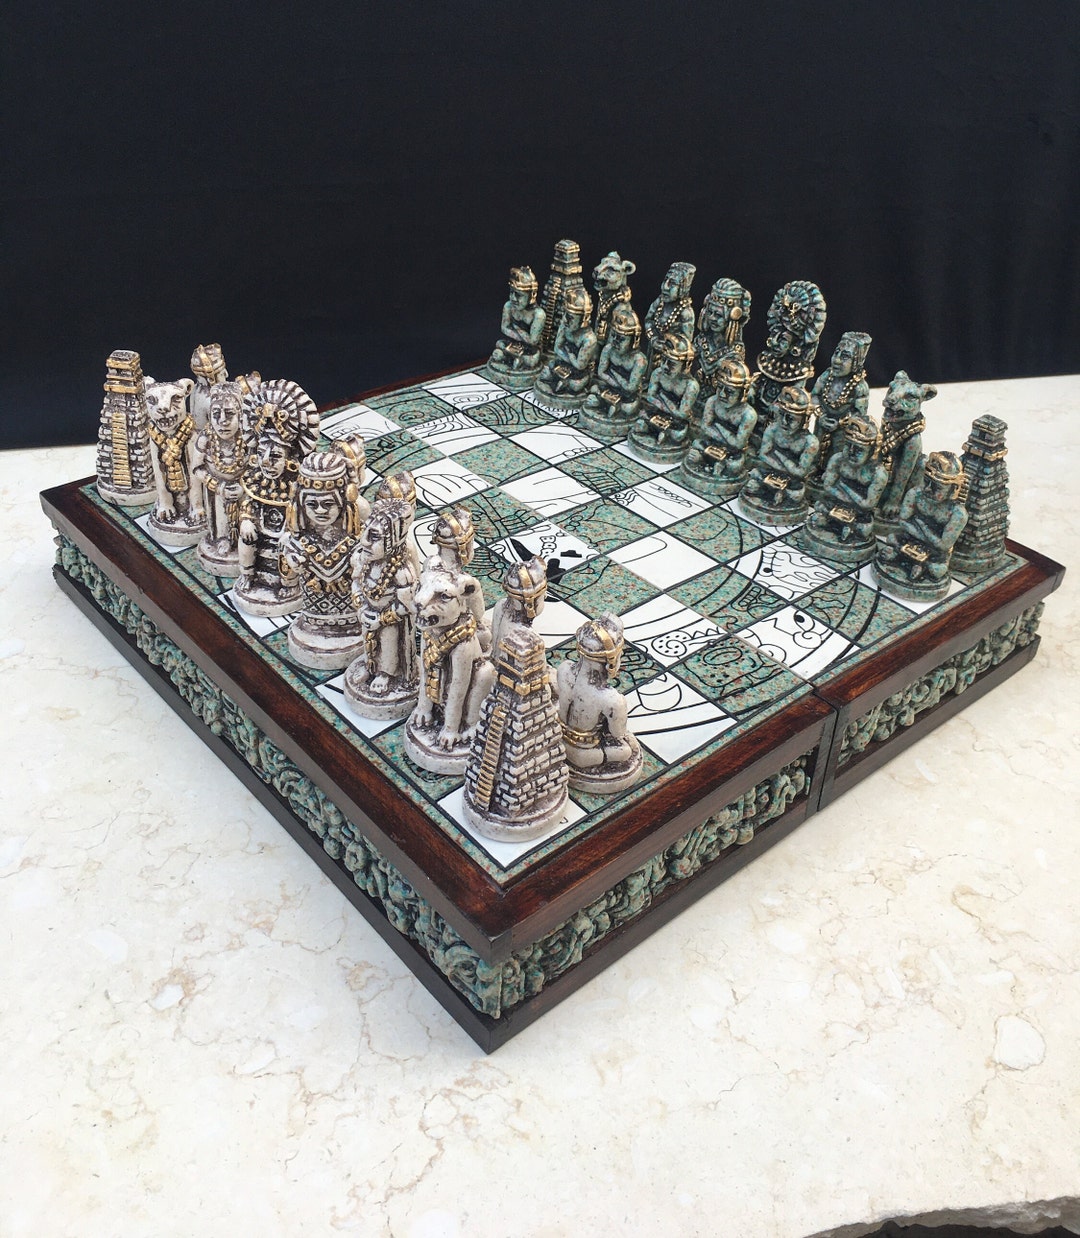 Chess Set Maya Chess Set Inspired by the Culture of Mexico - Etsy